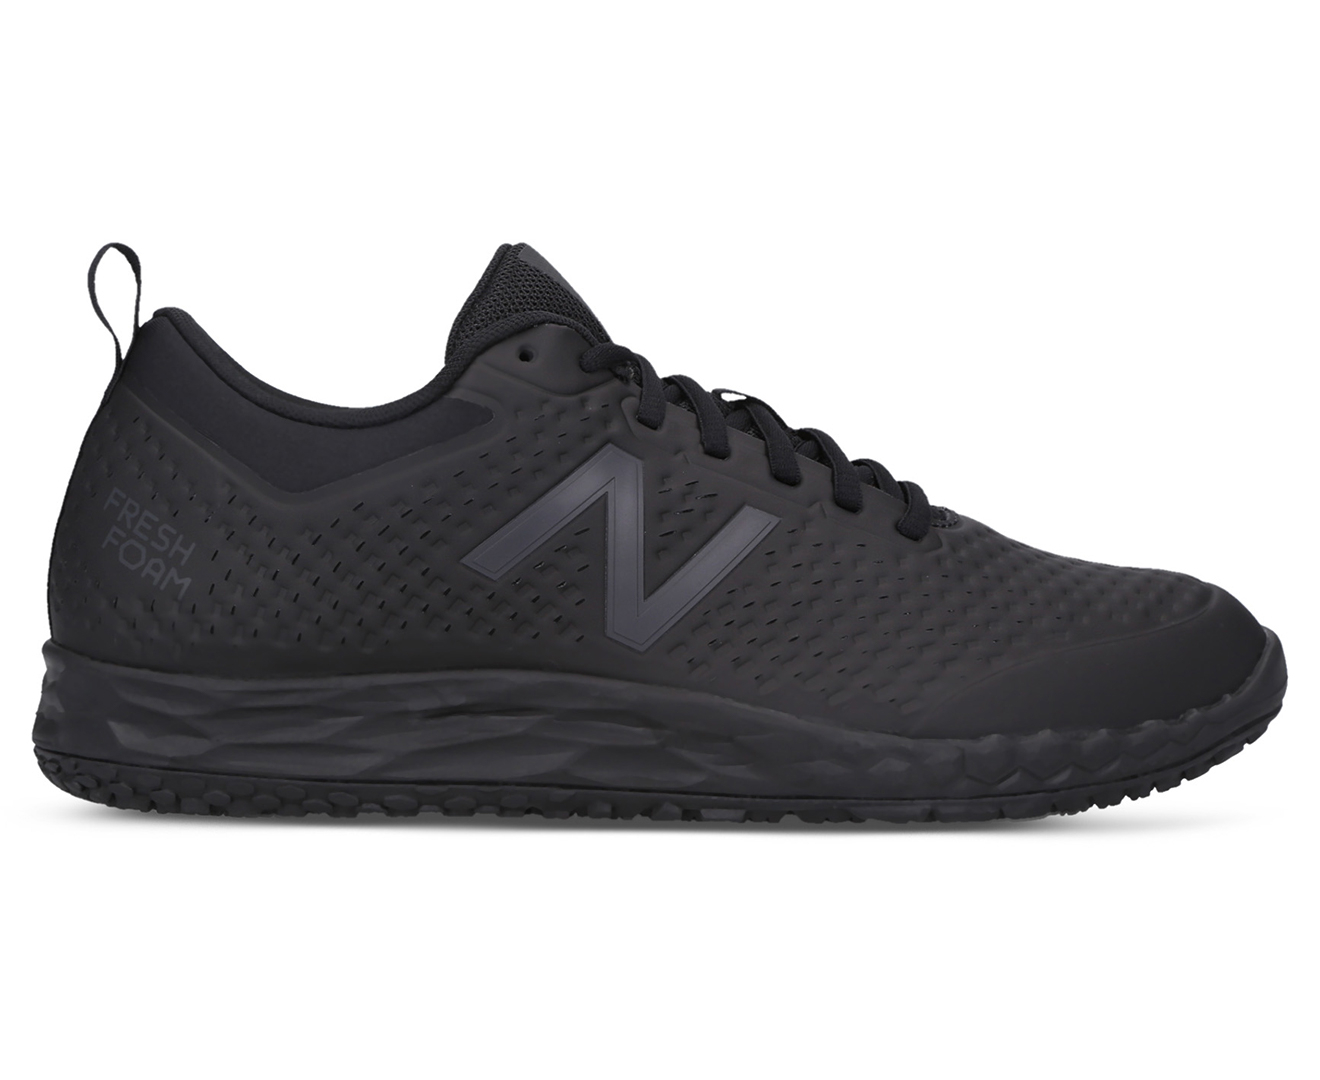 New Balance Outlet Online! Spend LESS 